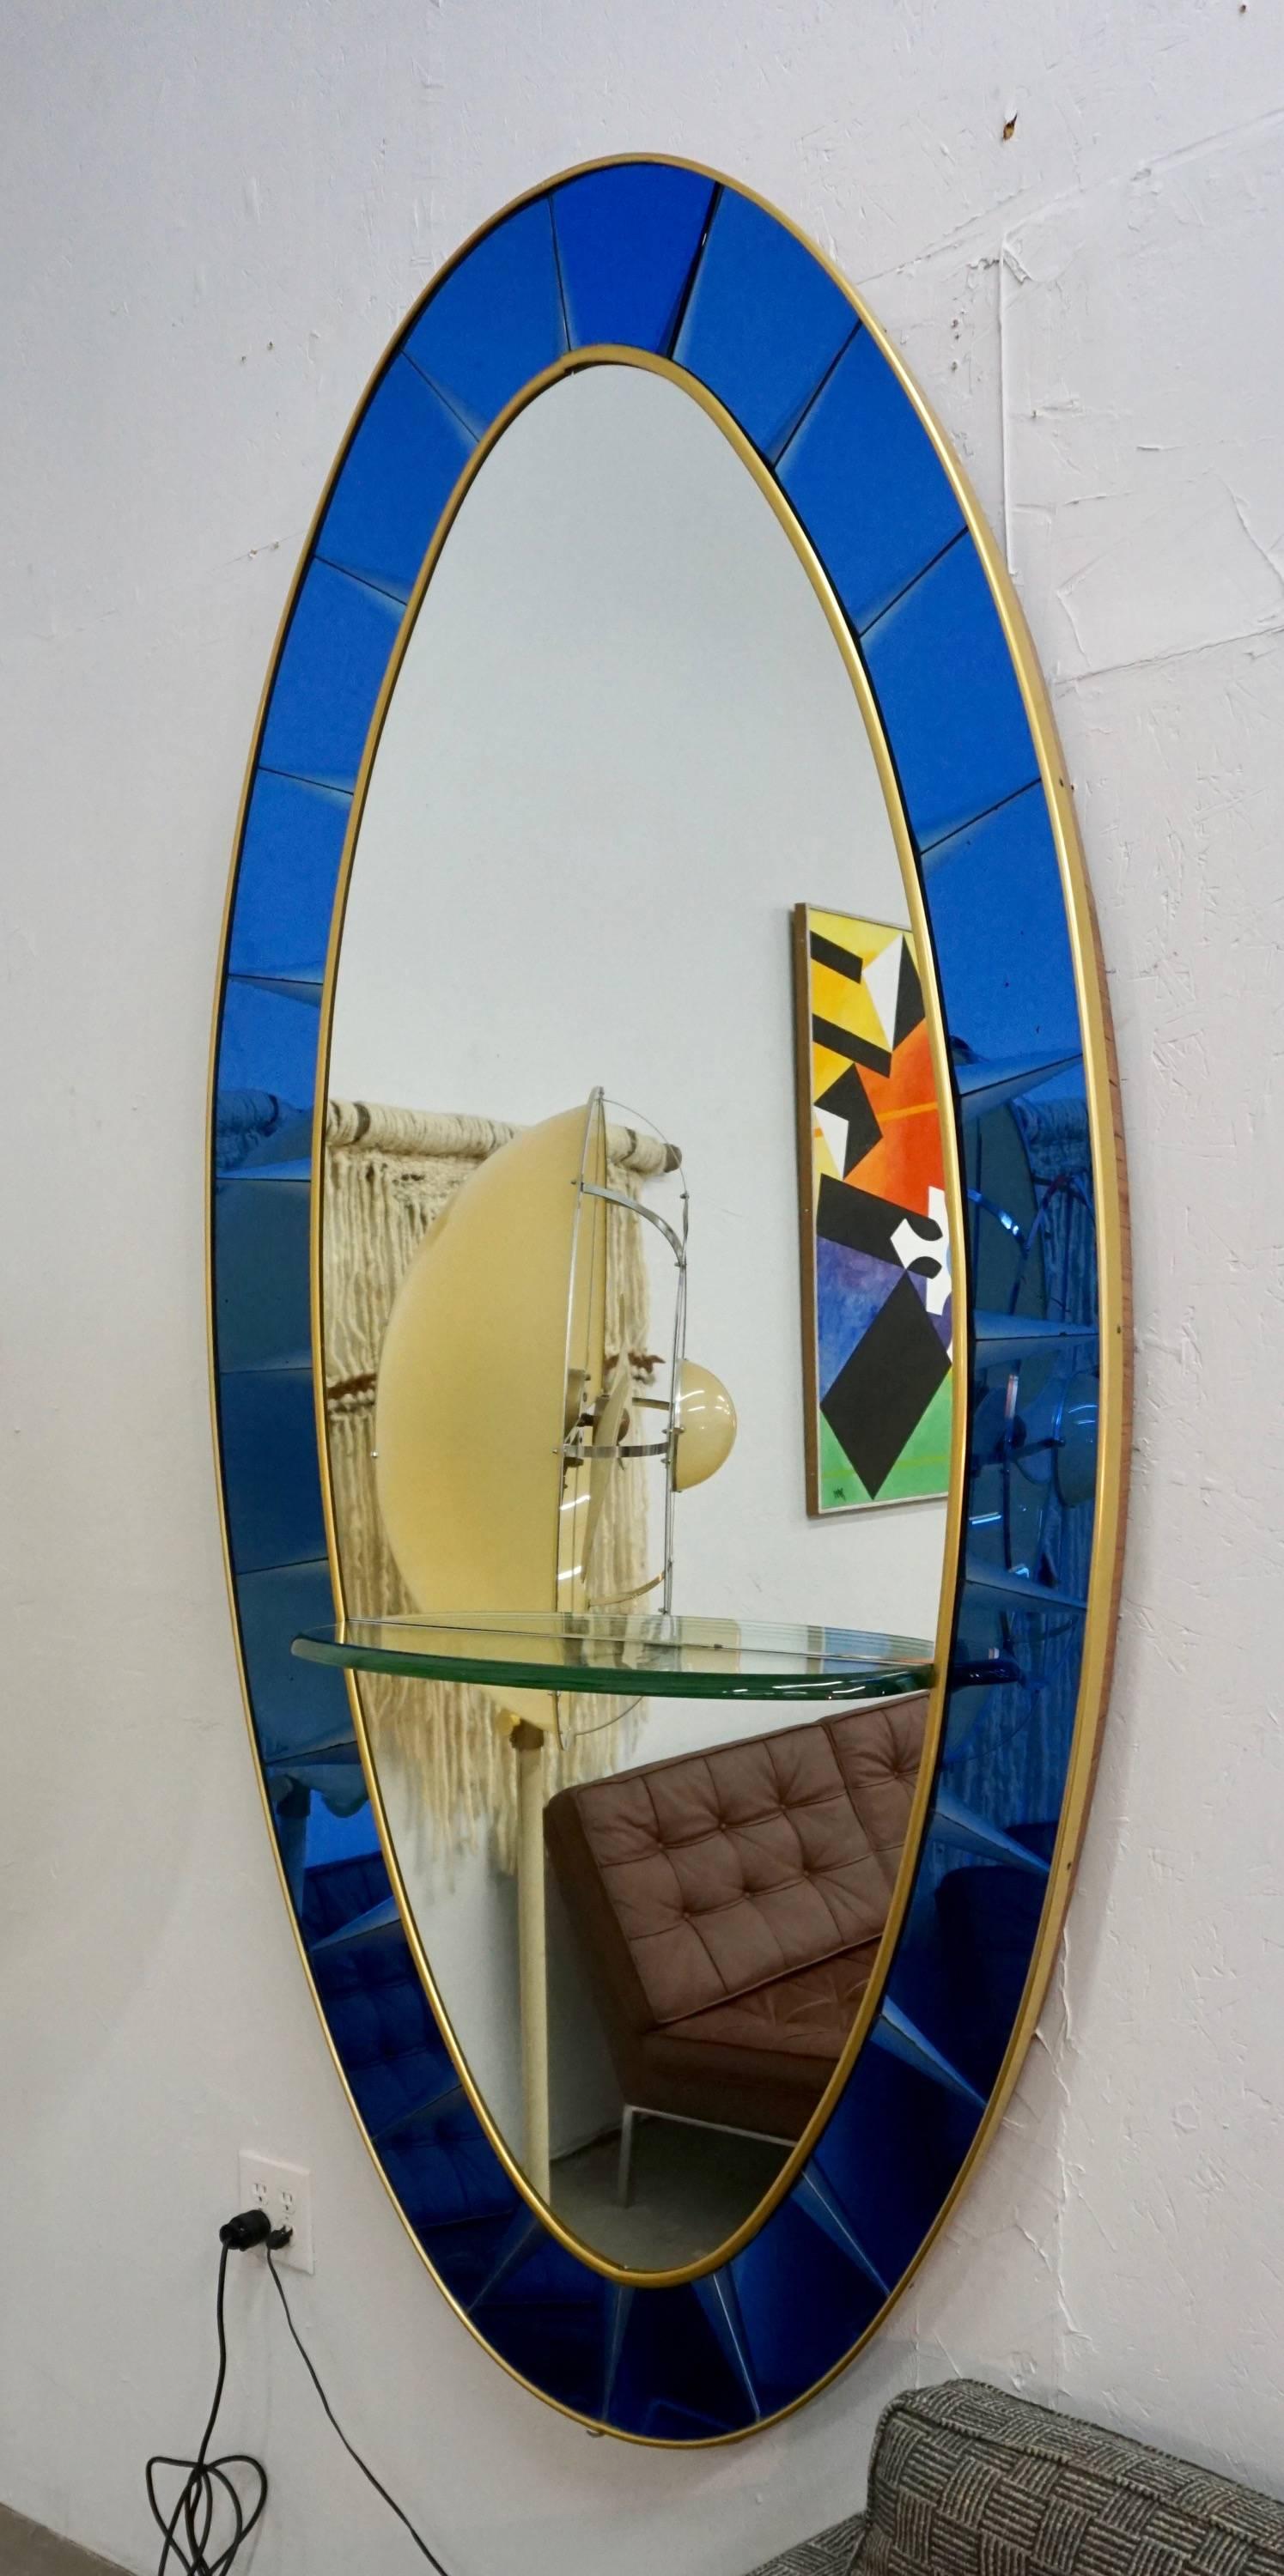 Beautiful large oval mirror, manufactured by Cristal Art, Turin, Italy.
The mirror is surrounded by beveled cobalt blue glass panels, placed in a gilt brass and wooden frame. A glass shelf measuring 28.5